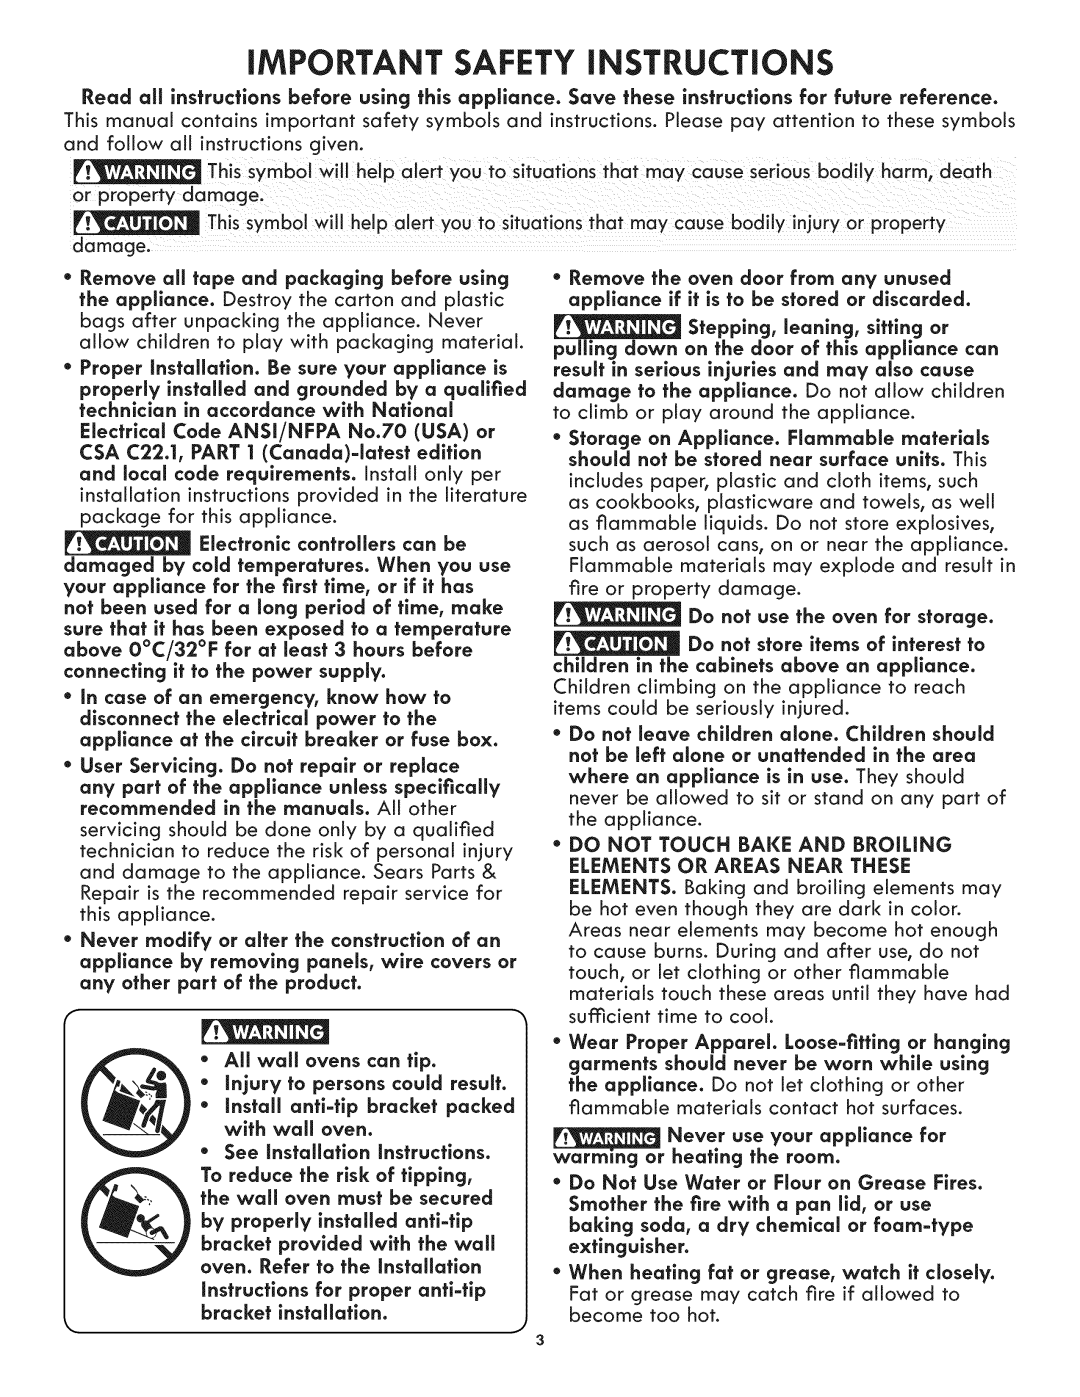 Kenmore 790.4809, 790.4807, 790.4808 manual iMPORTANT SAFETY iNSTRUCTiONS 